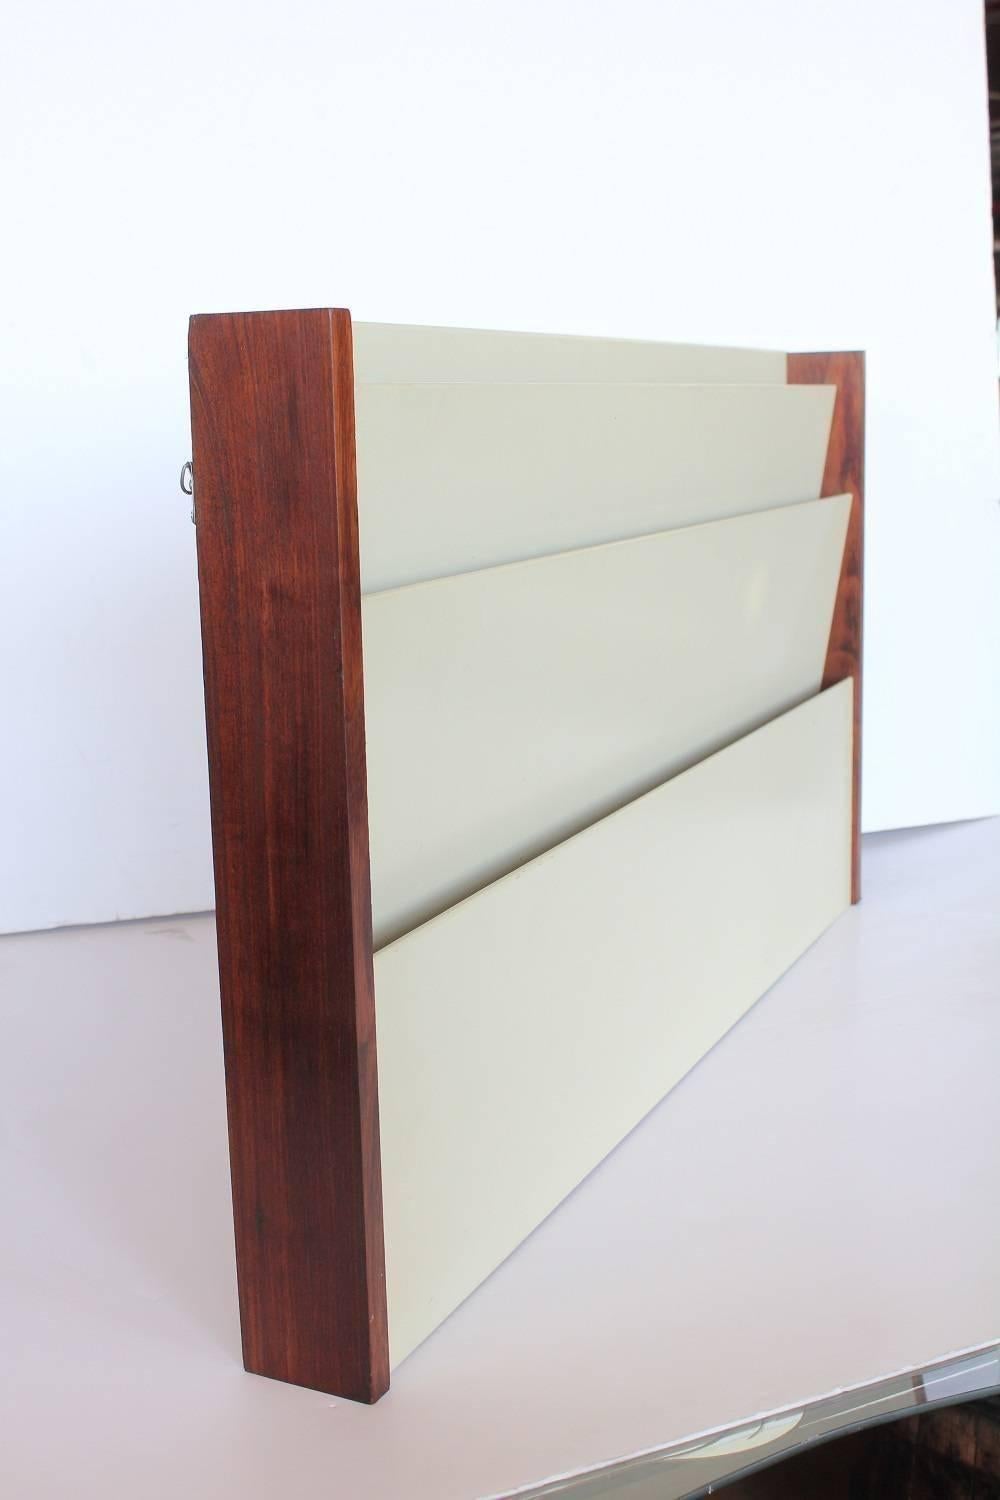 Wall mount magazine holder by Peter Pepper products. Walnut wood frame with white laminate dividers.